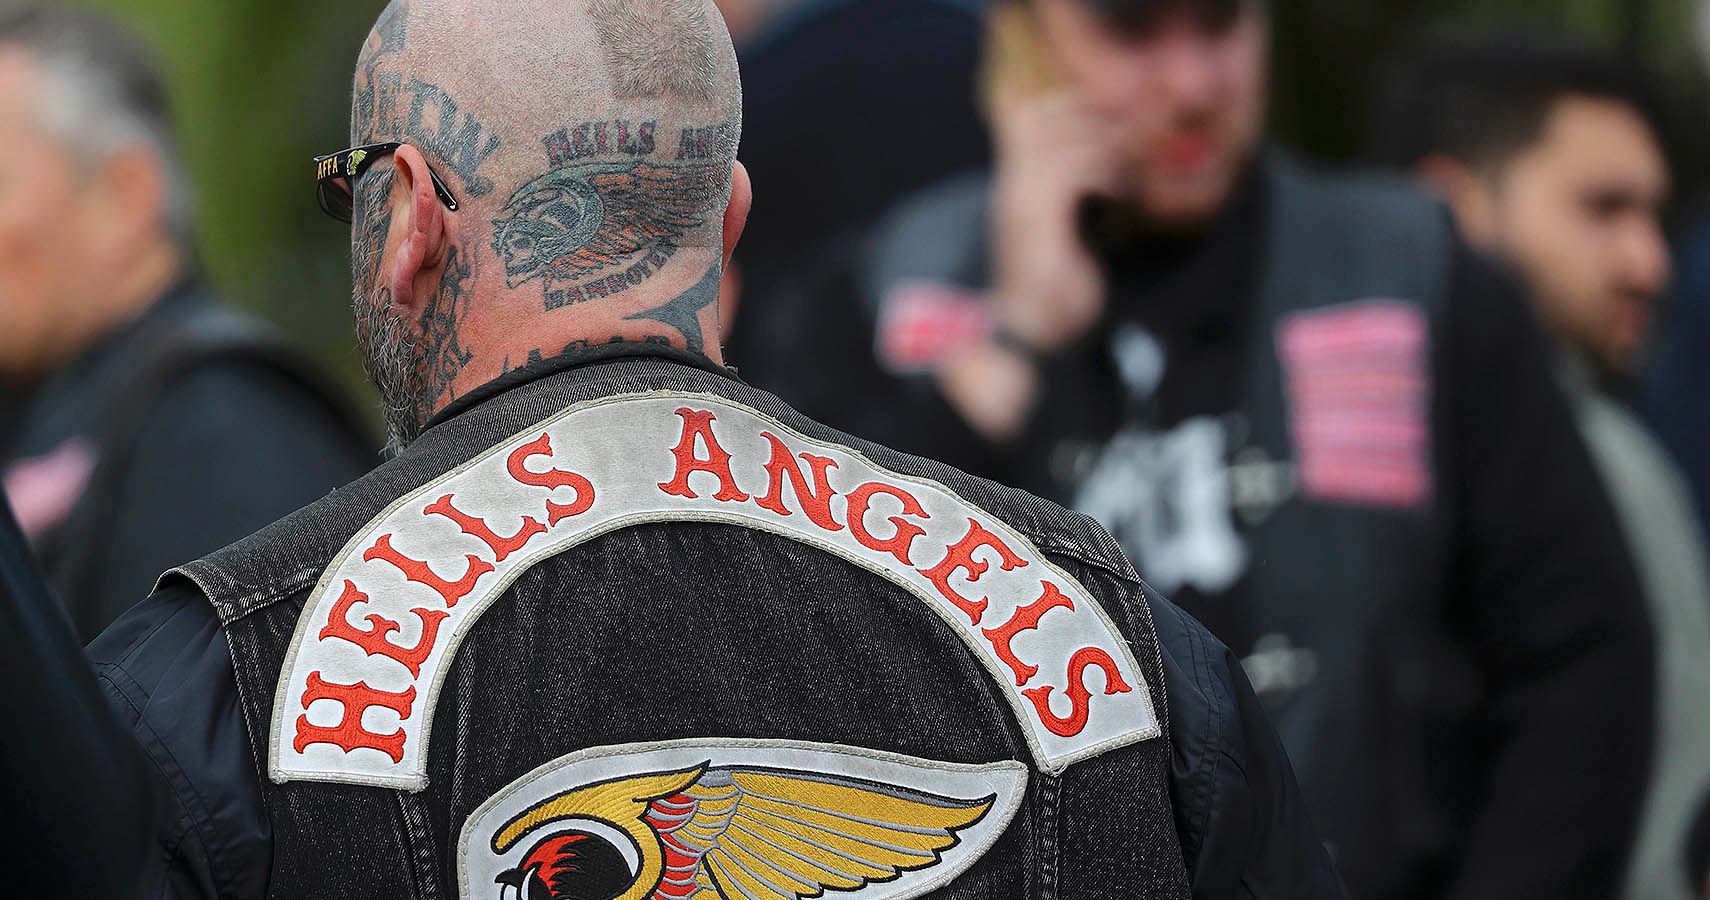 15 Flattering Facts About The Hells Angels Motorcycle Club